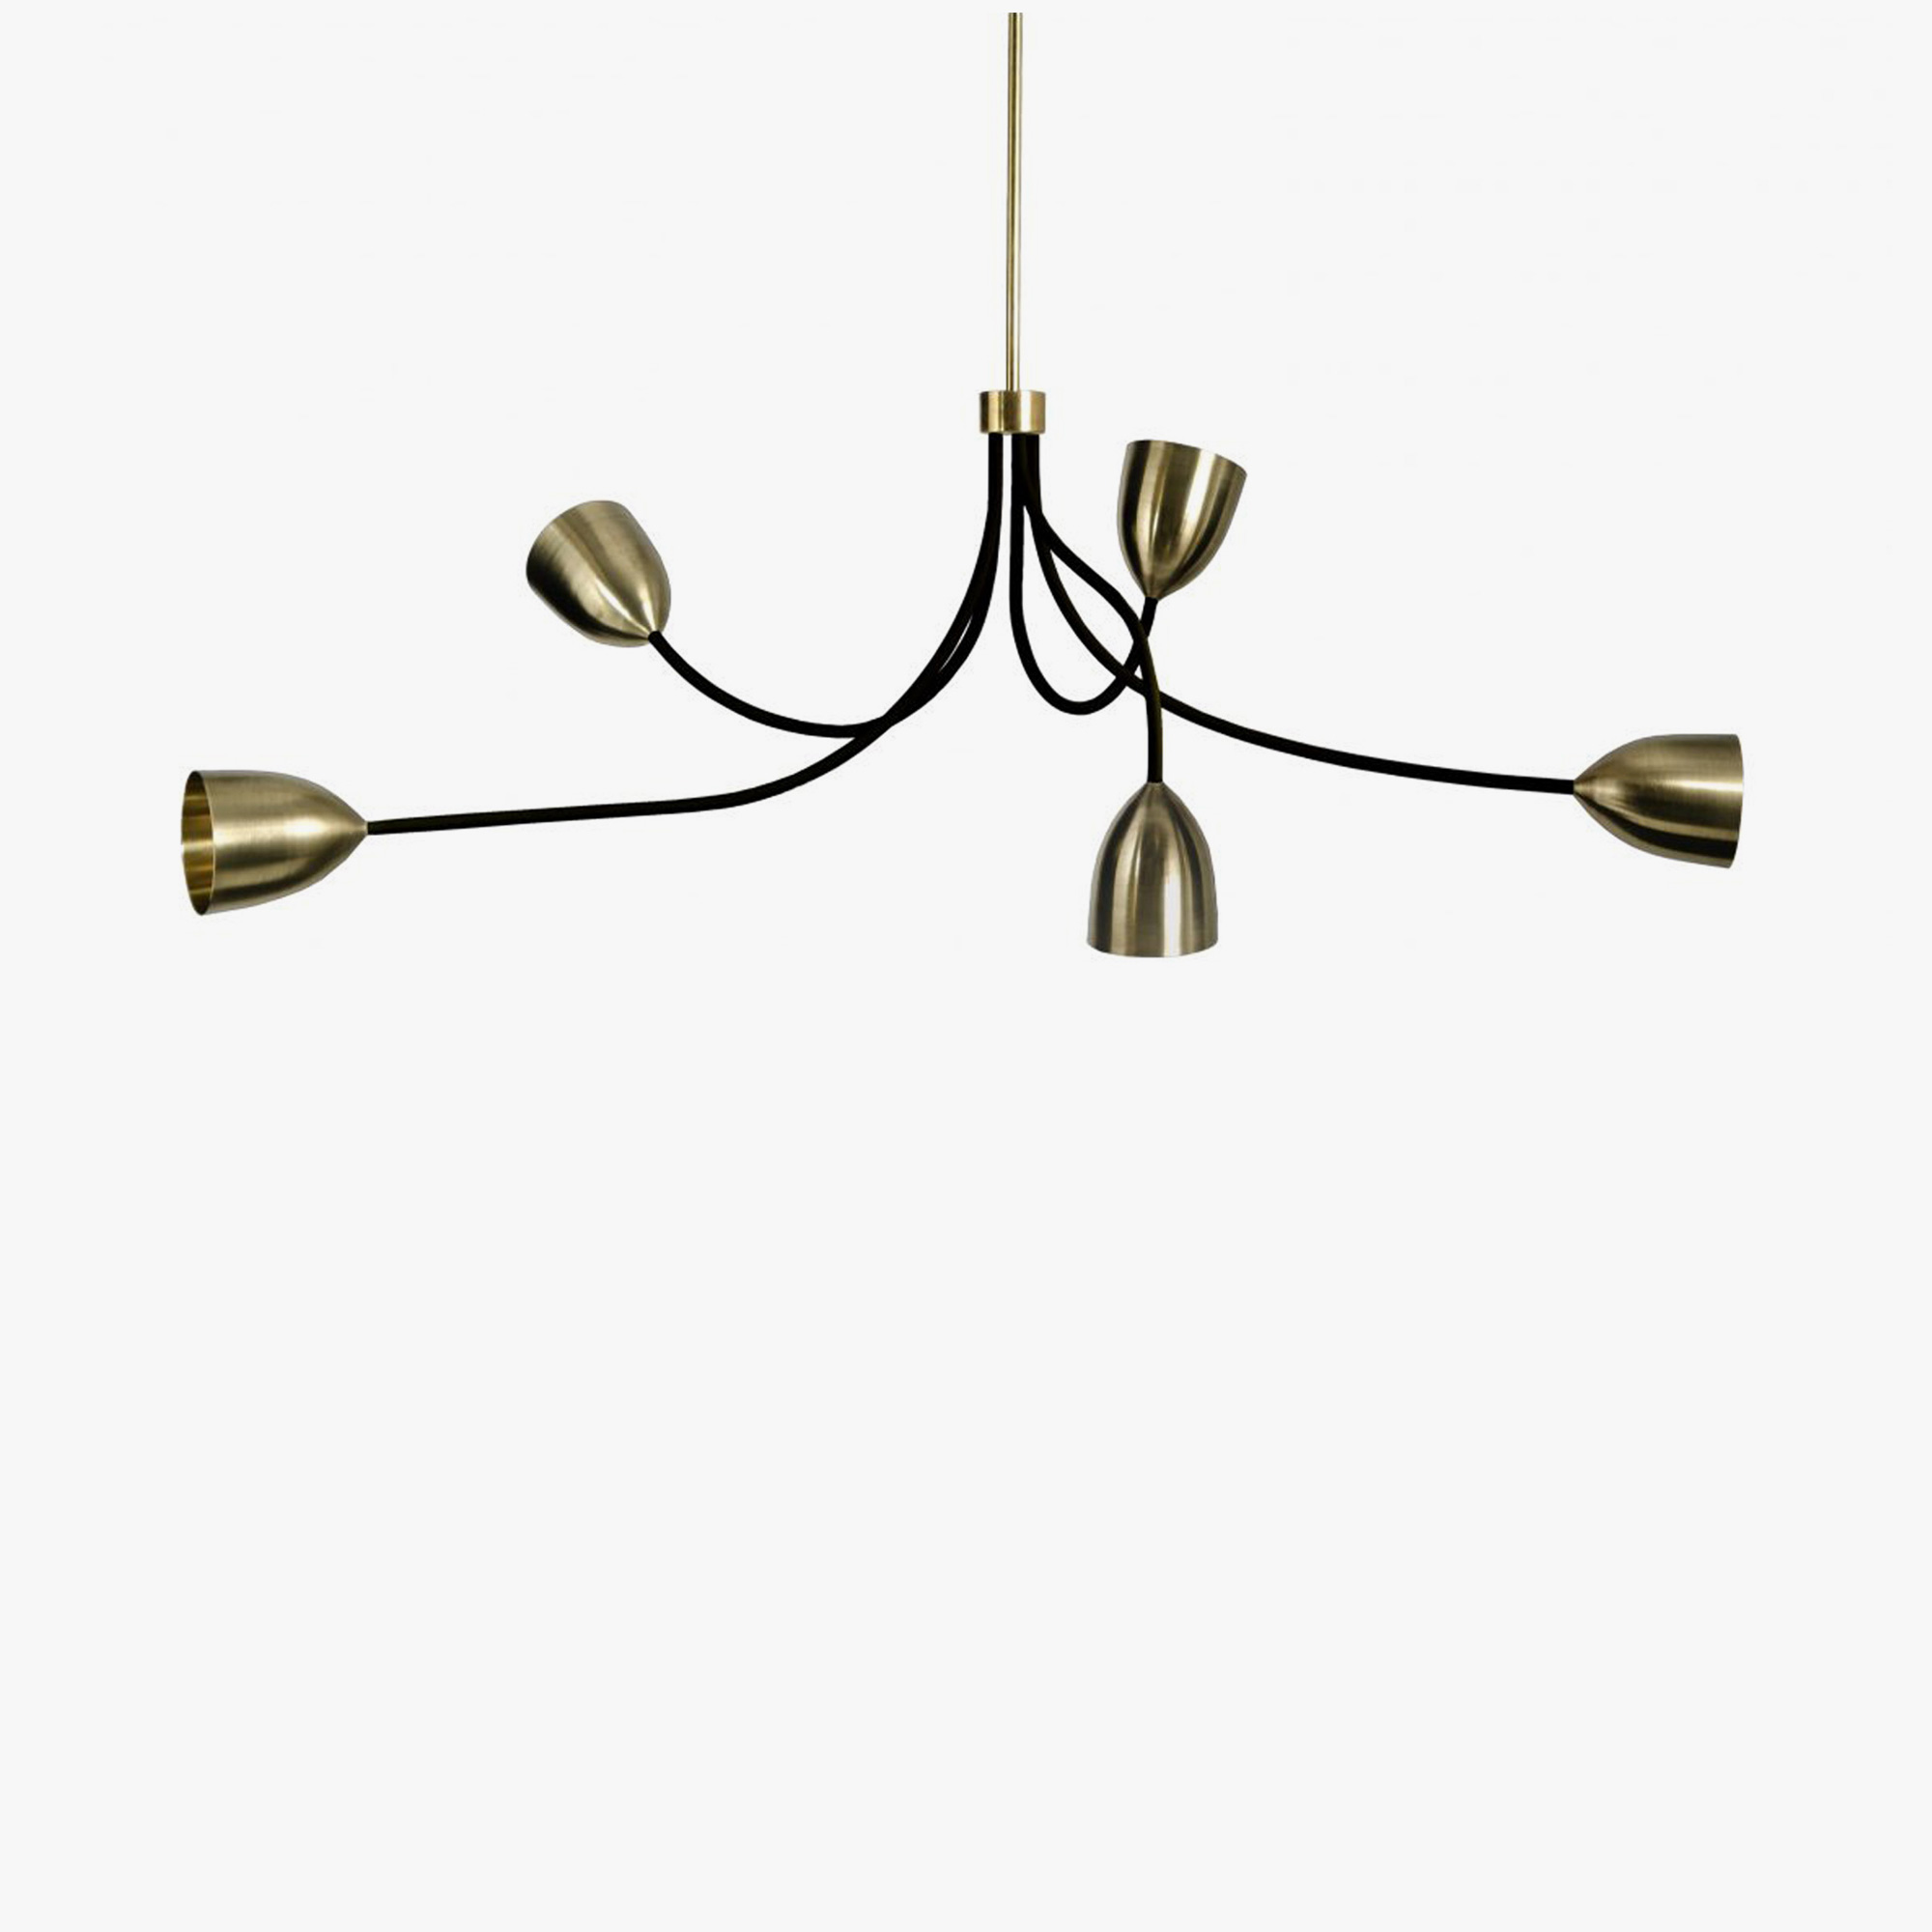 TULIP CEILING LIGHT by Porta Romana | South Hill Home